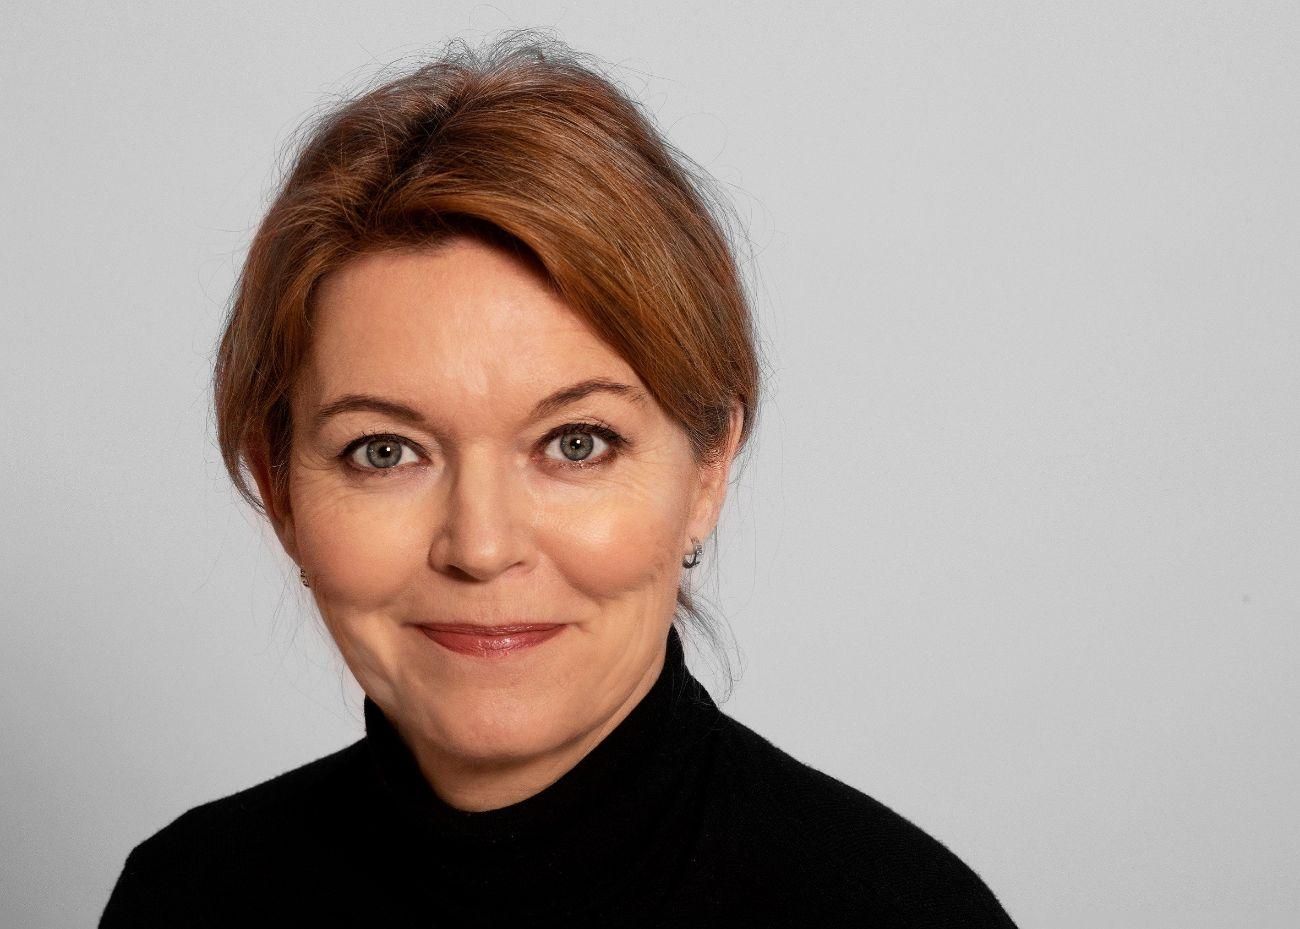 Lise Kingo - Independent director at the Board of Directors of Sanofi and Member of the Appointments, Governance and CSR Committee